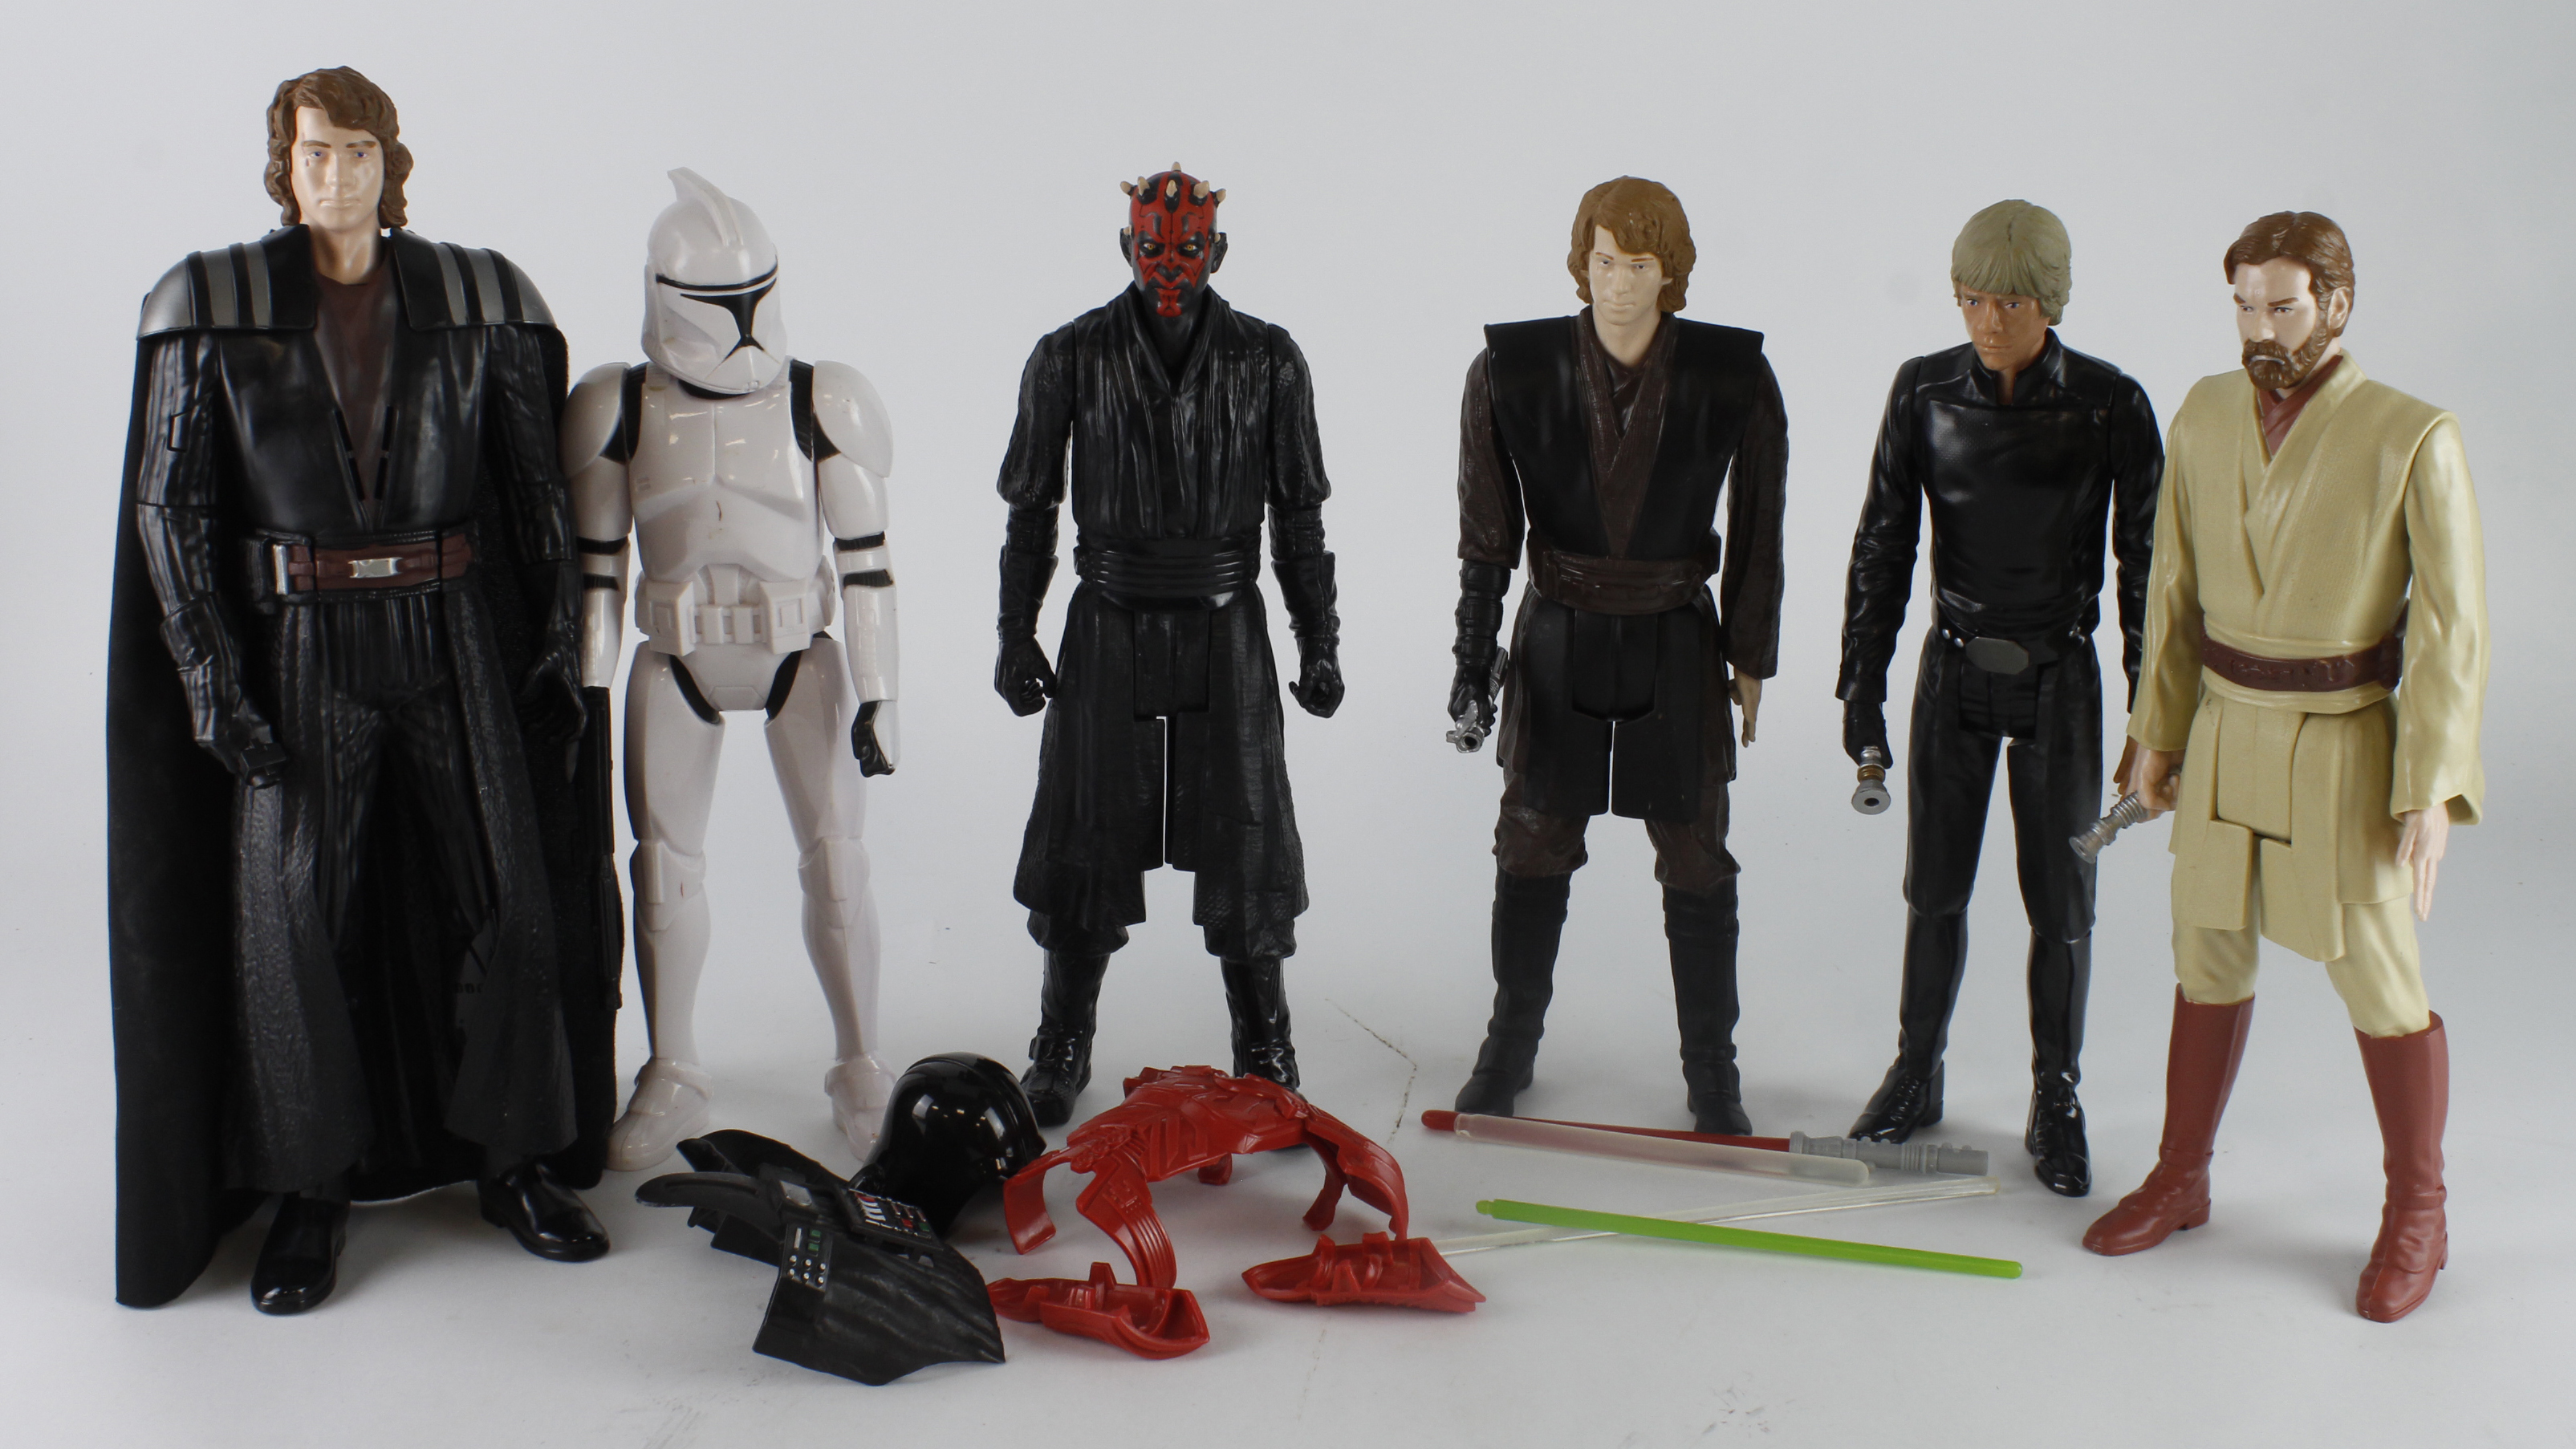 Star Wars. Six Star Wars large scale figures, by Hasbro, circa 2010s, including Darth Vader, Obi